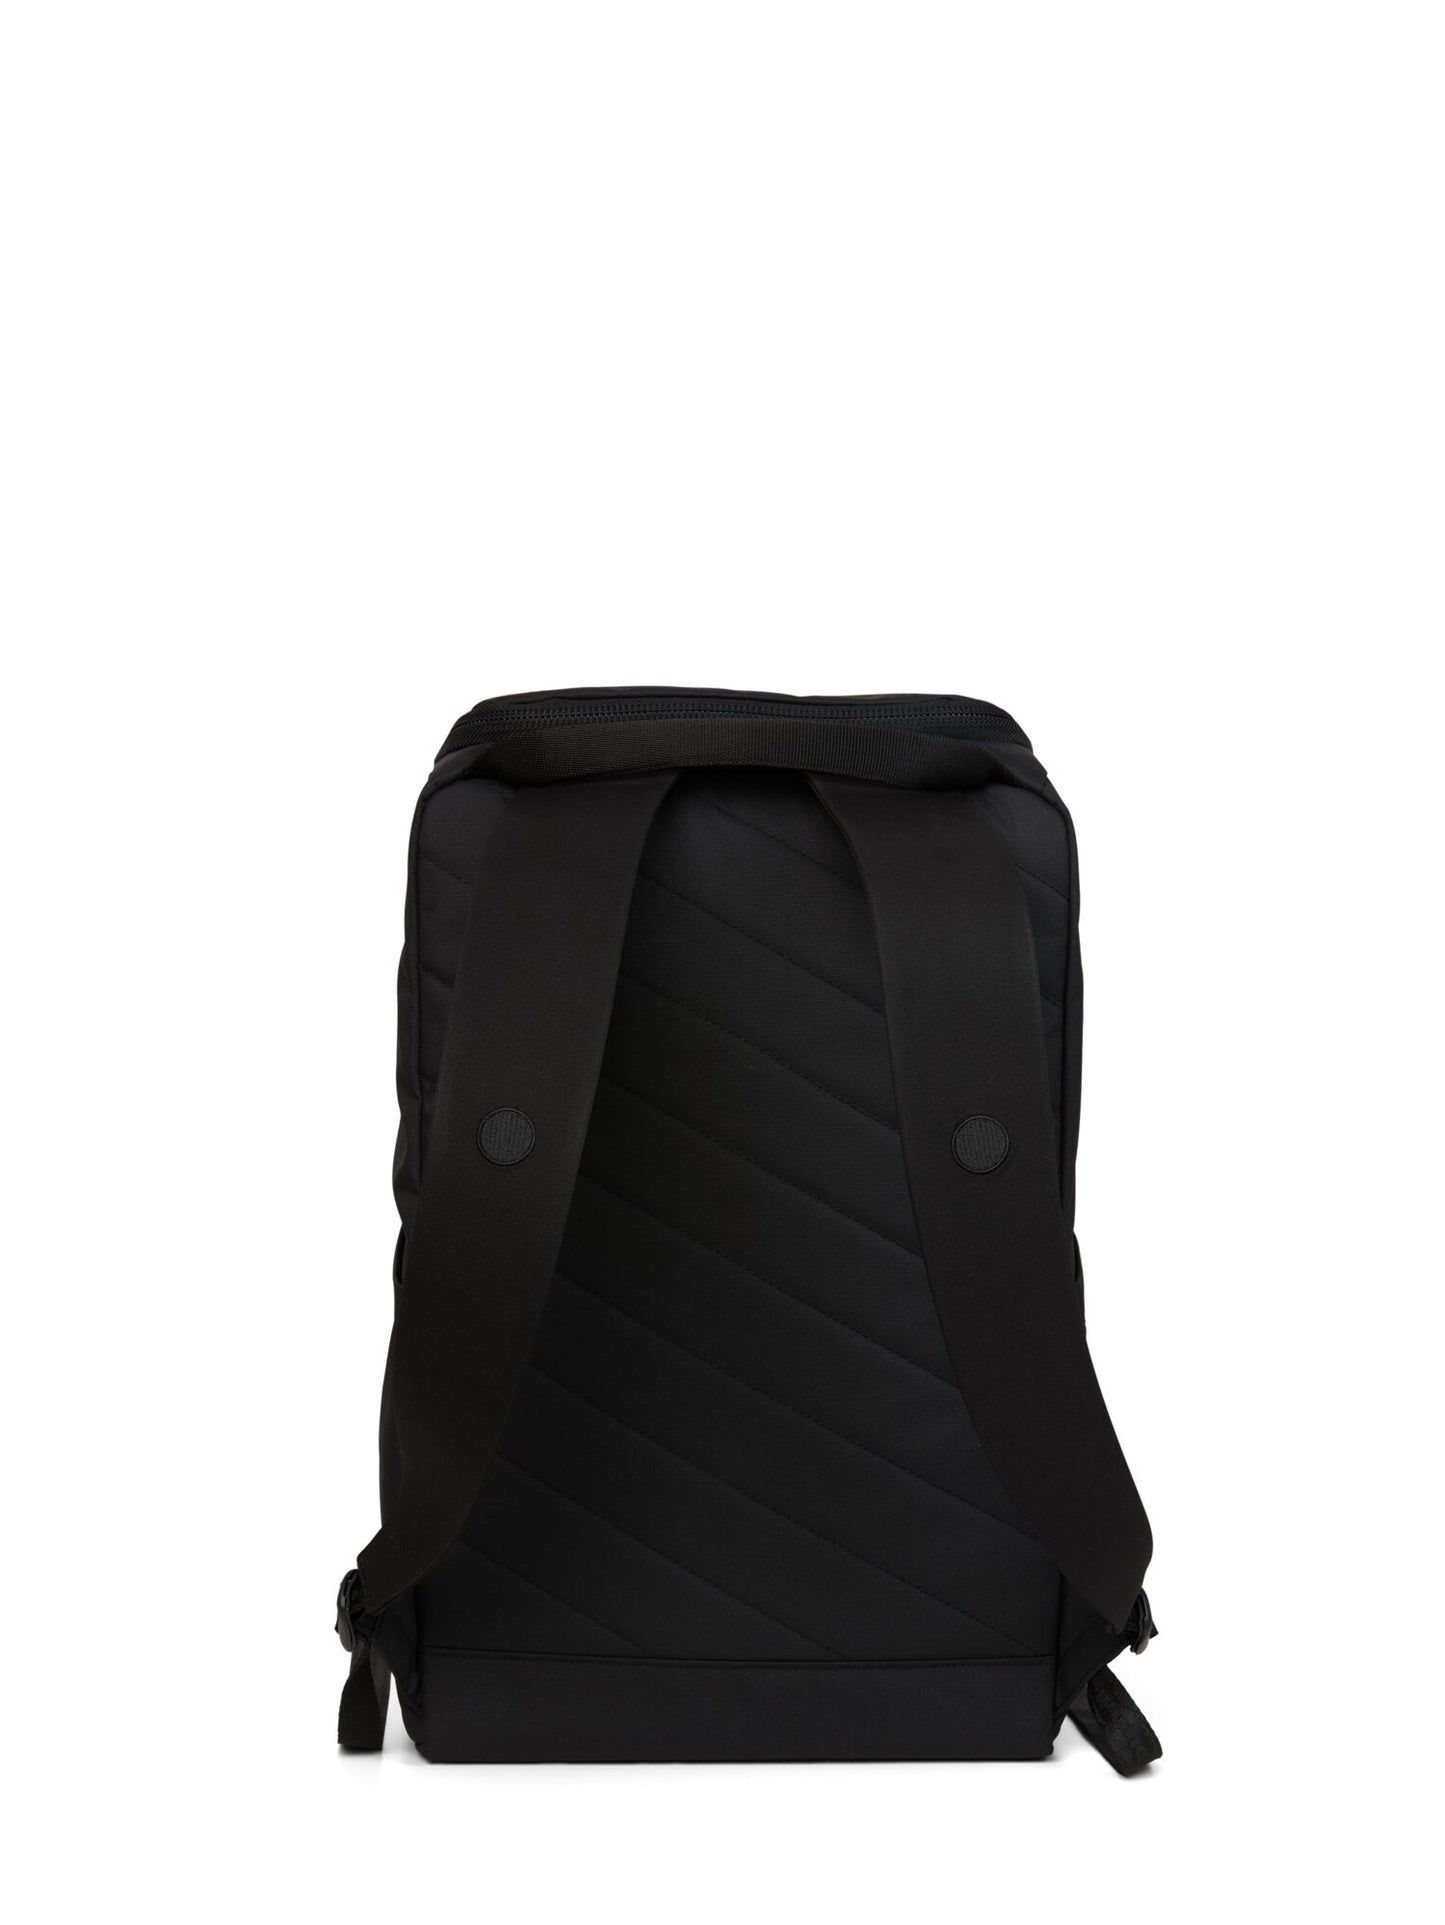 pinqponq-backpack-purik-rooted-black-back